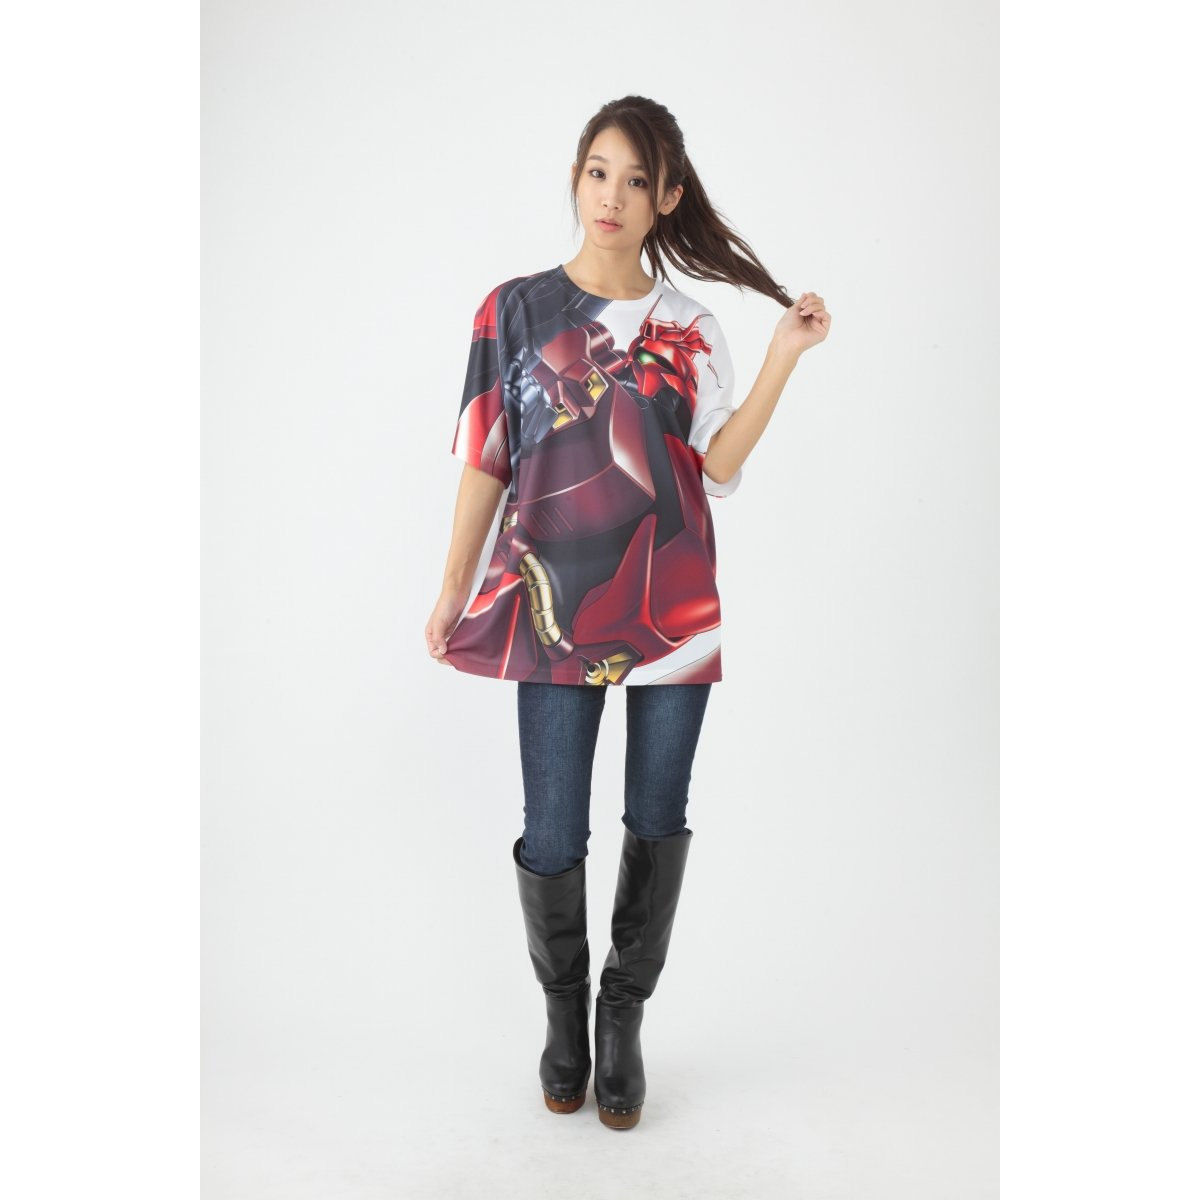 Mobile Suit Gundam: Char's Counterattack All-Over Print T-shirt - MSN-04 ver.